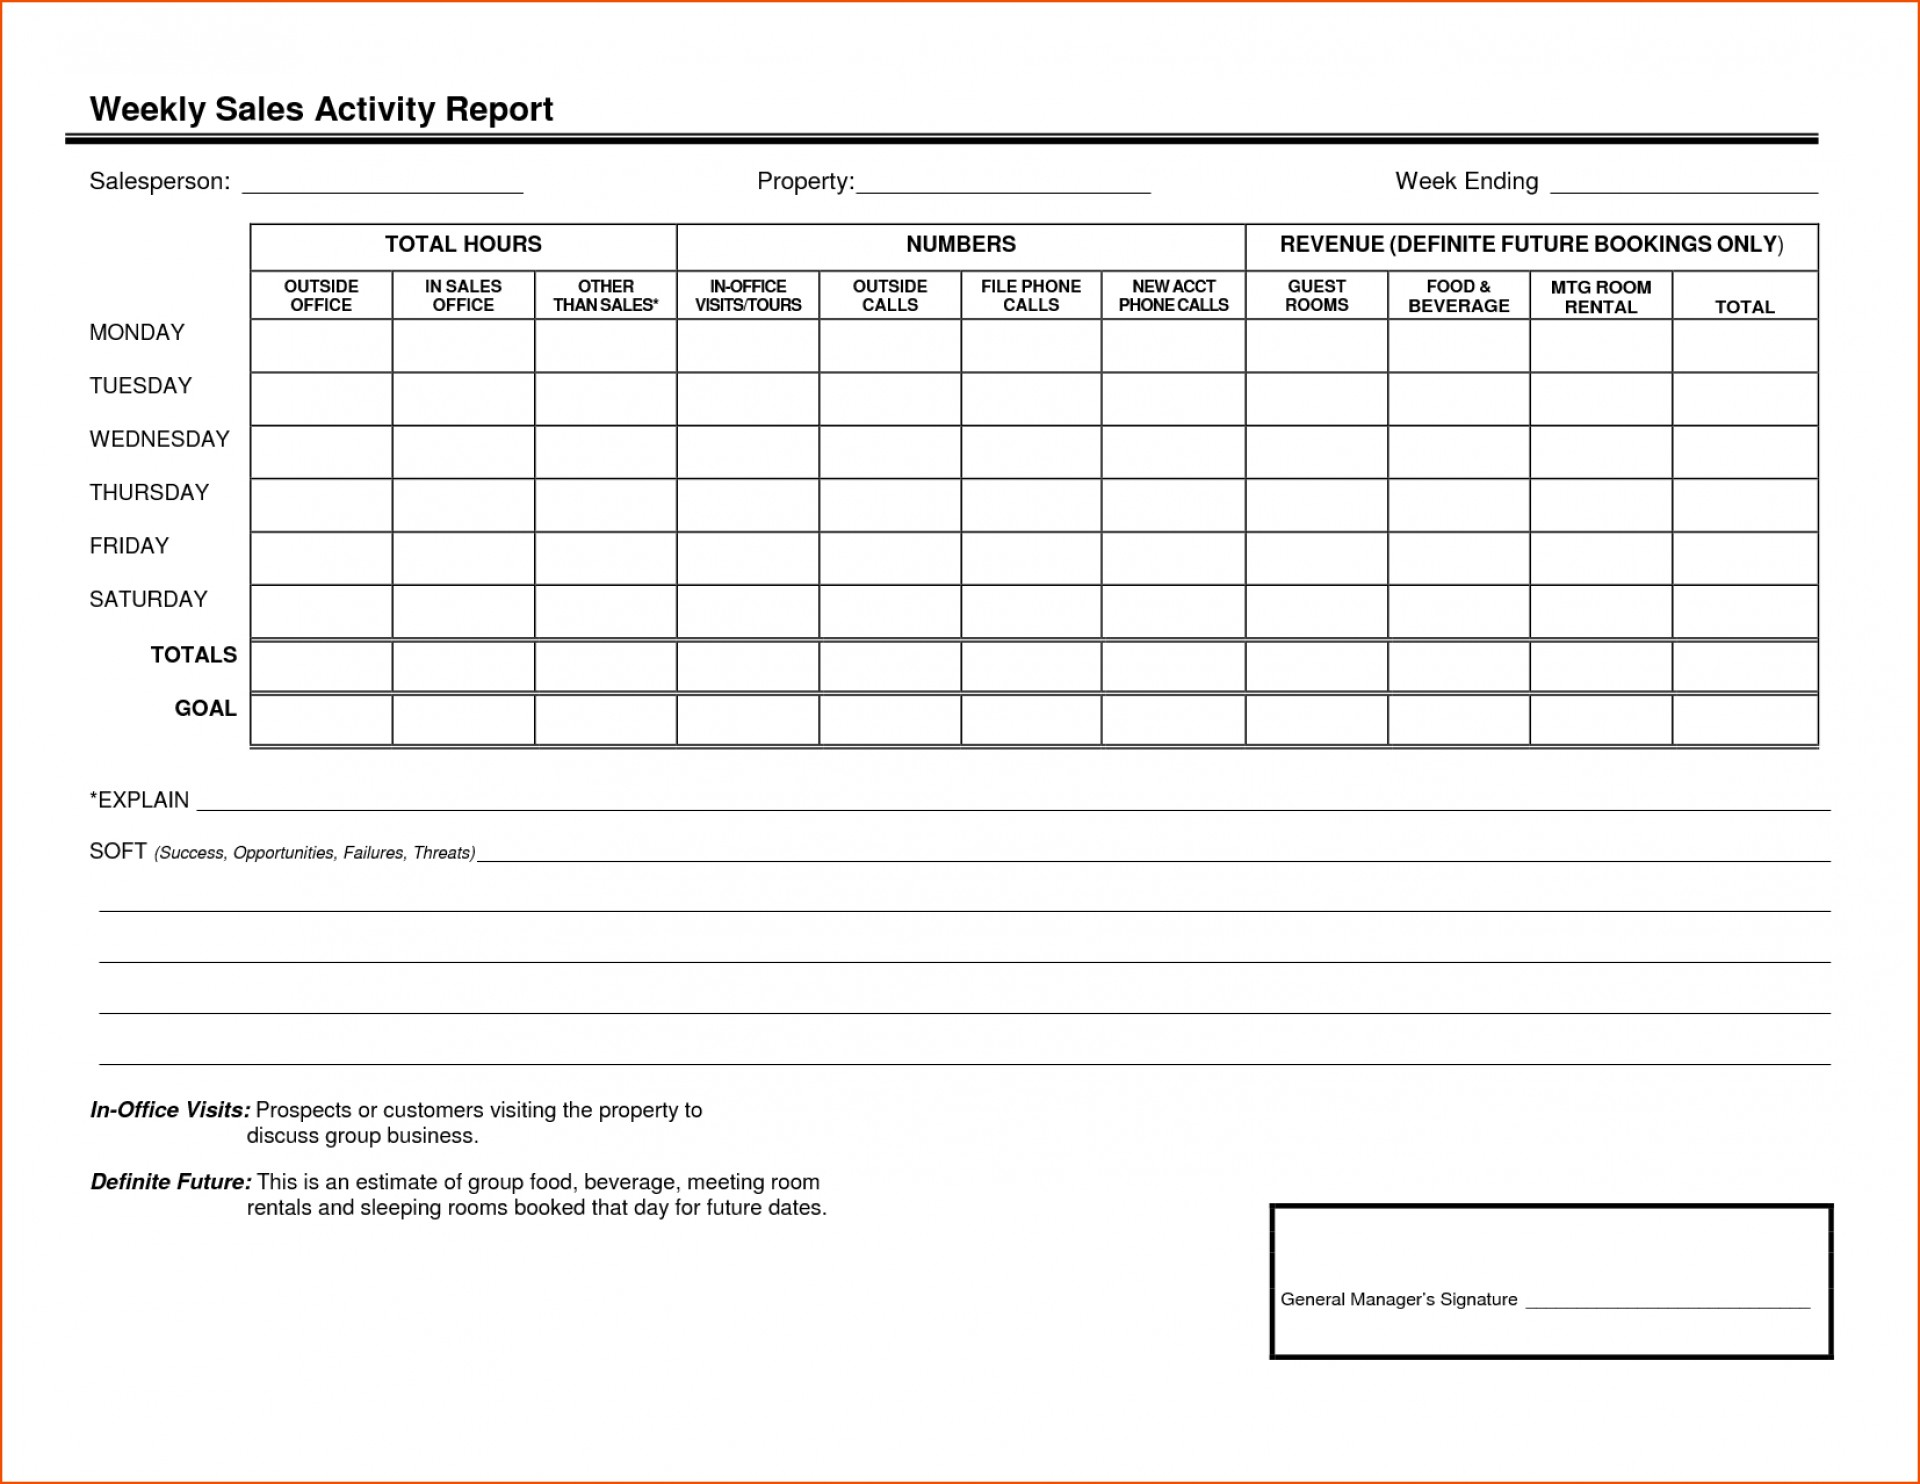 001 Sales Calls Report Template Call Awesome Ideas Daily In Throughout Daily Sales Call Report Template Free Download